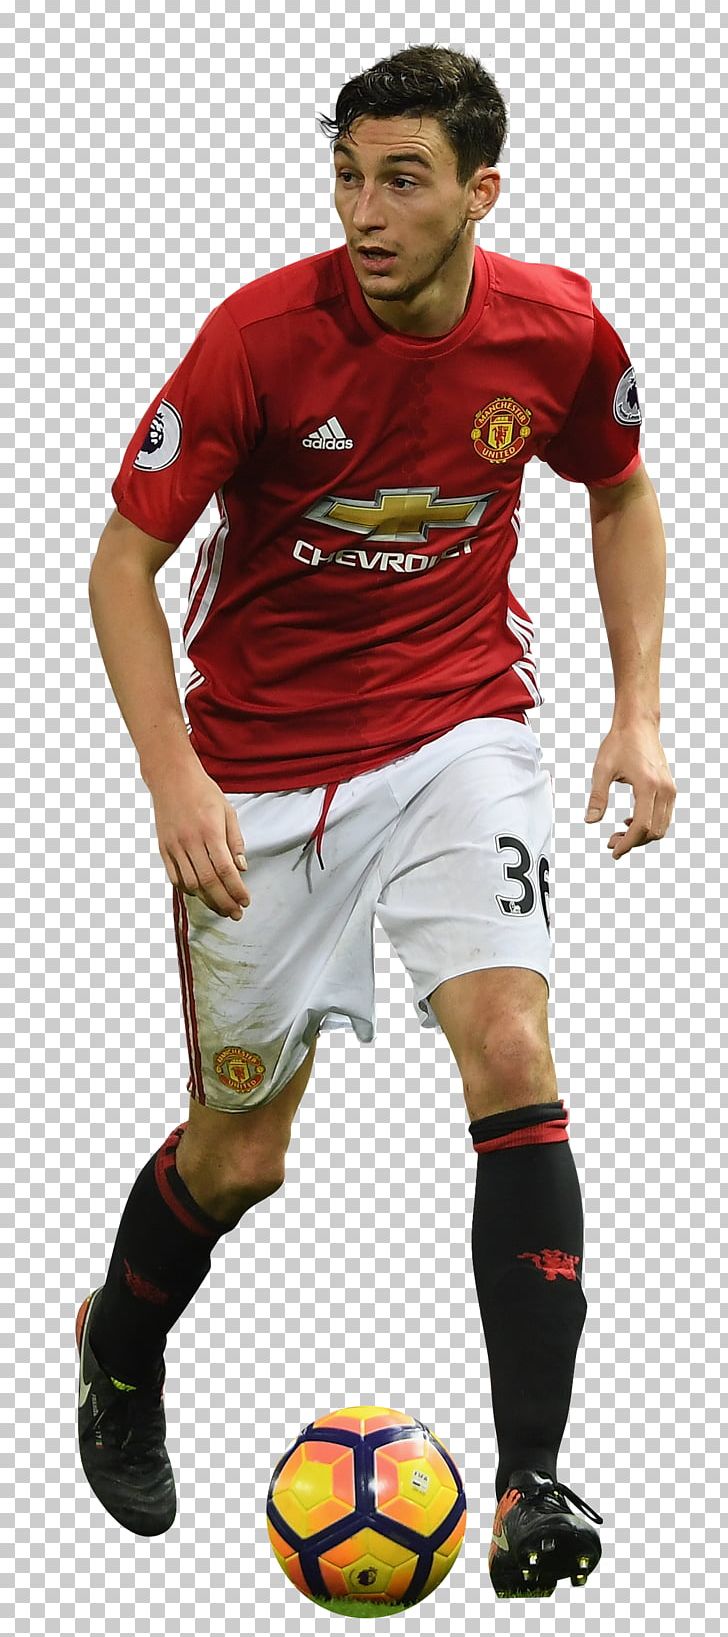 Jersey Matteo Darmian Team Sport Manchester United F.C. Football PNG, Clipart, Ball, Clothing, Football, Football Player, Jersey Free PNG Download